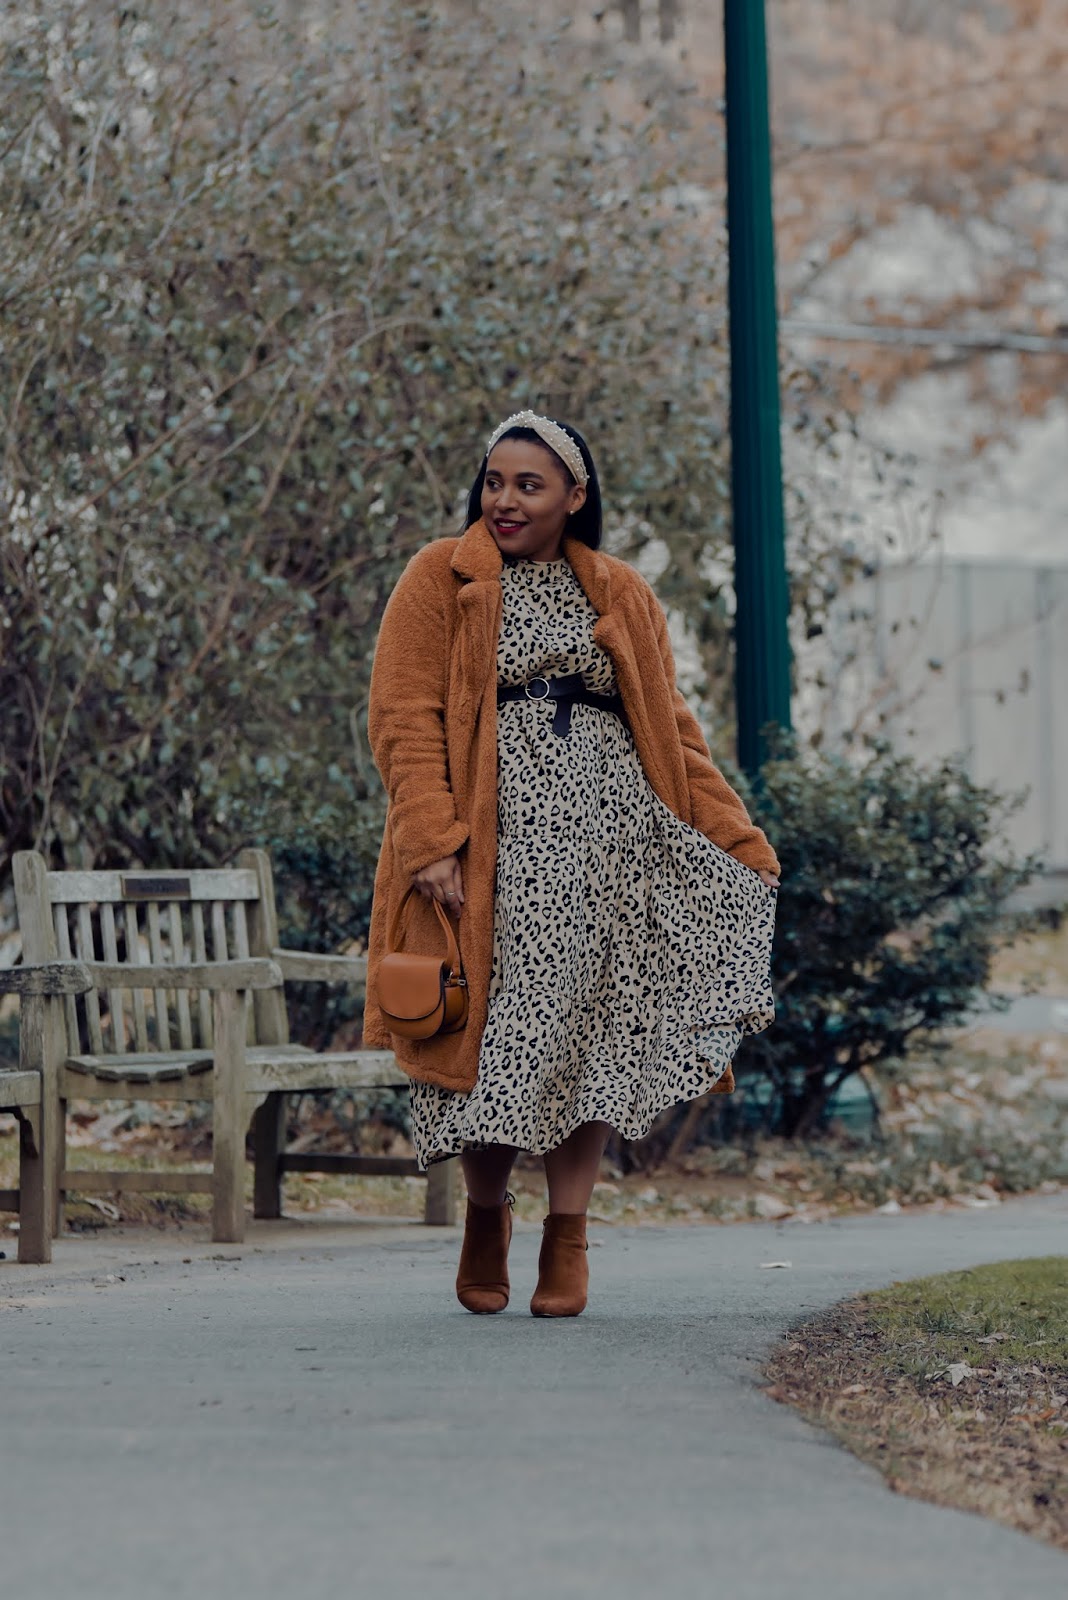 STYLE A DRESS FOR WINTER | OUTFIT IDEAS ...